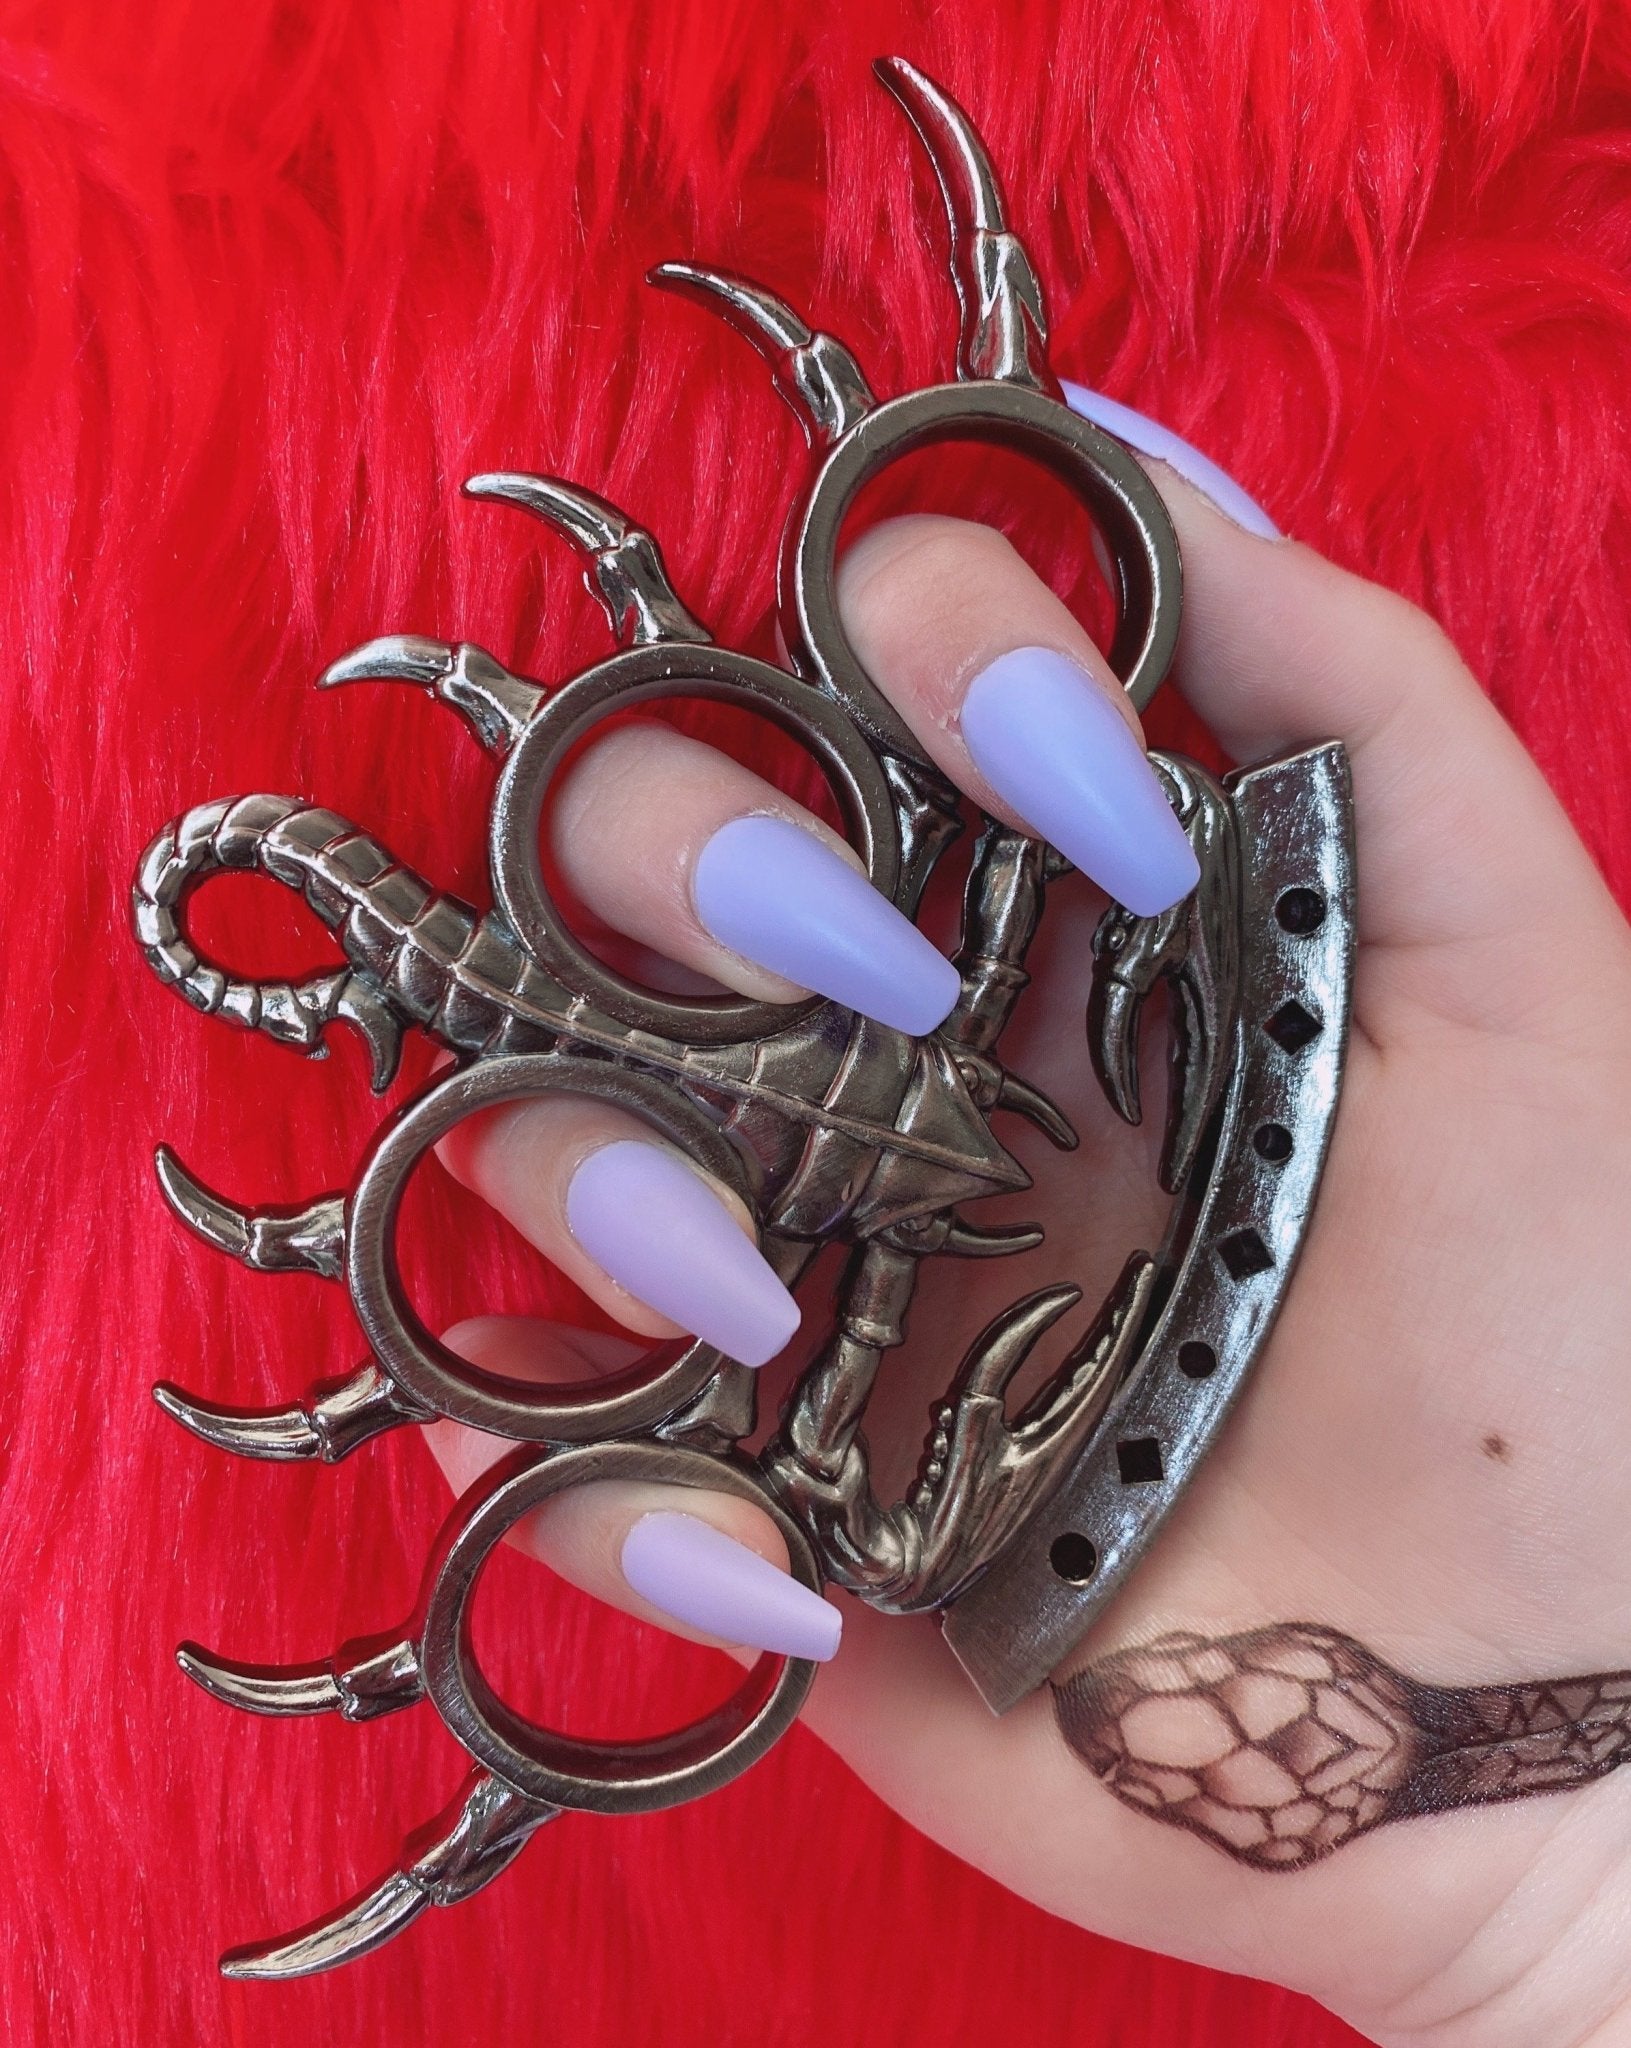 Scorpion Knuckles - Blades For Babes - Knuckles - 6